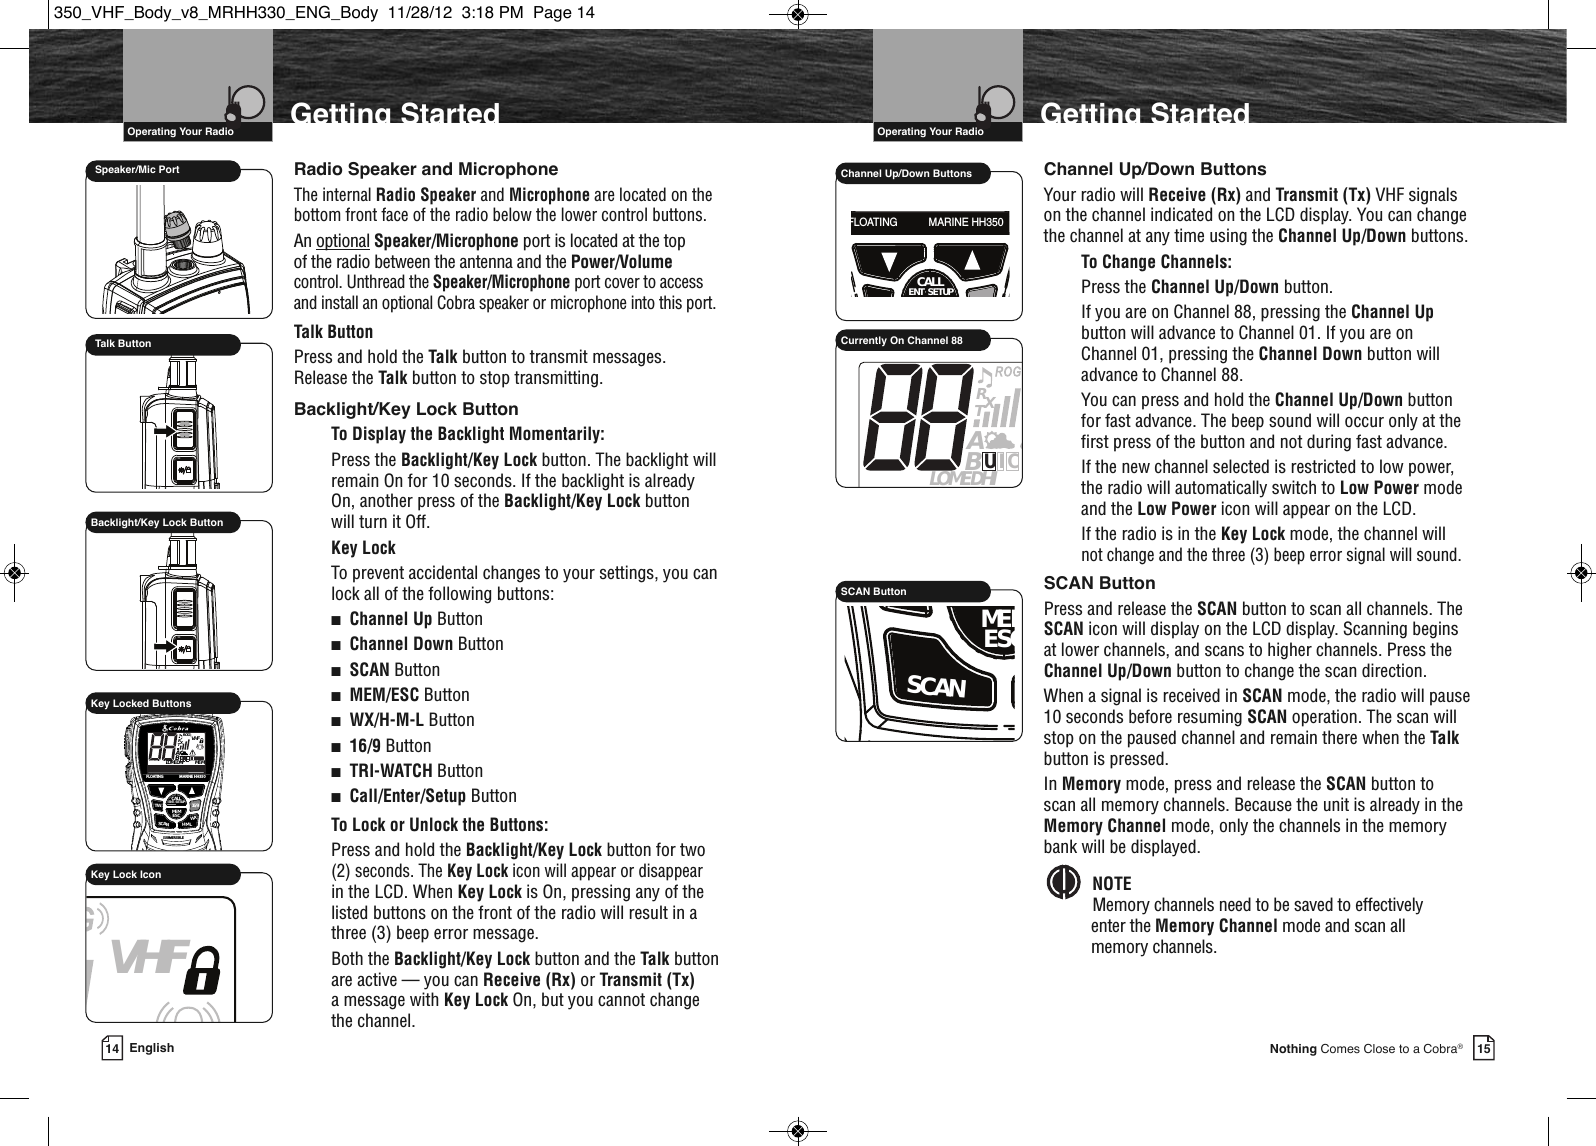 Page 10 of Cobra Electronics MRHH350 MARINE TRANSCEIVER User Manual MRHH330 ENG Body